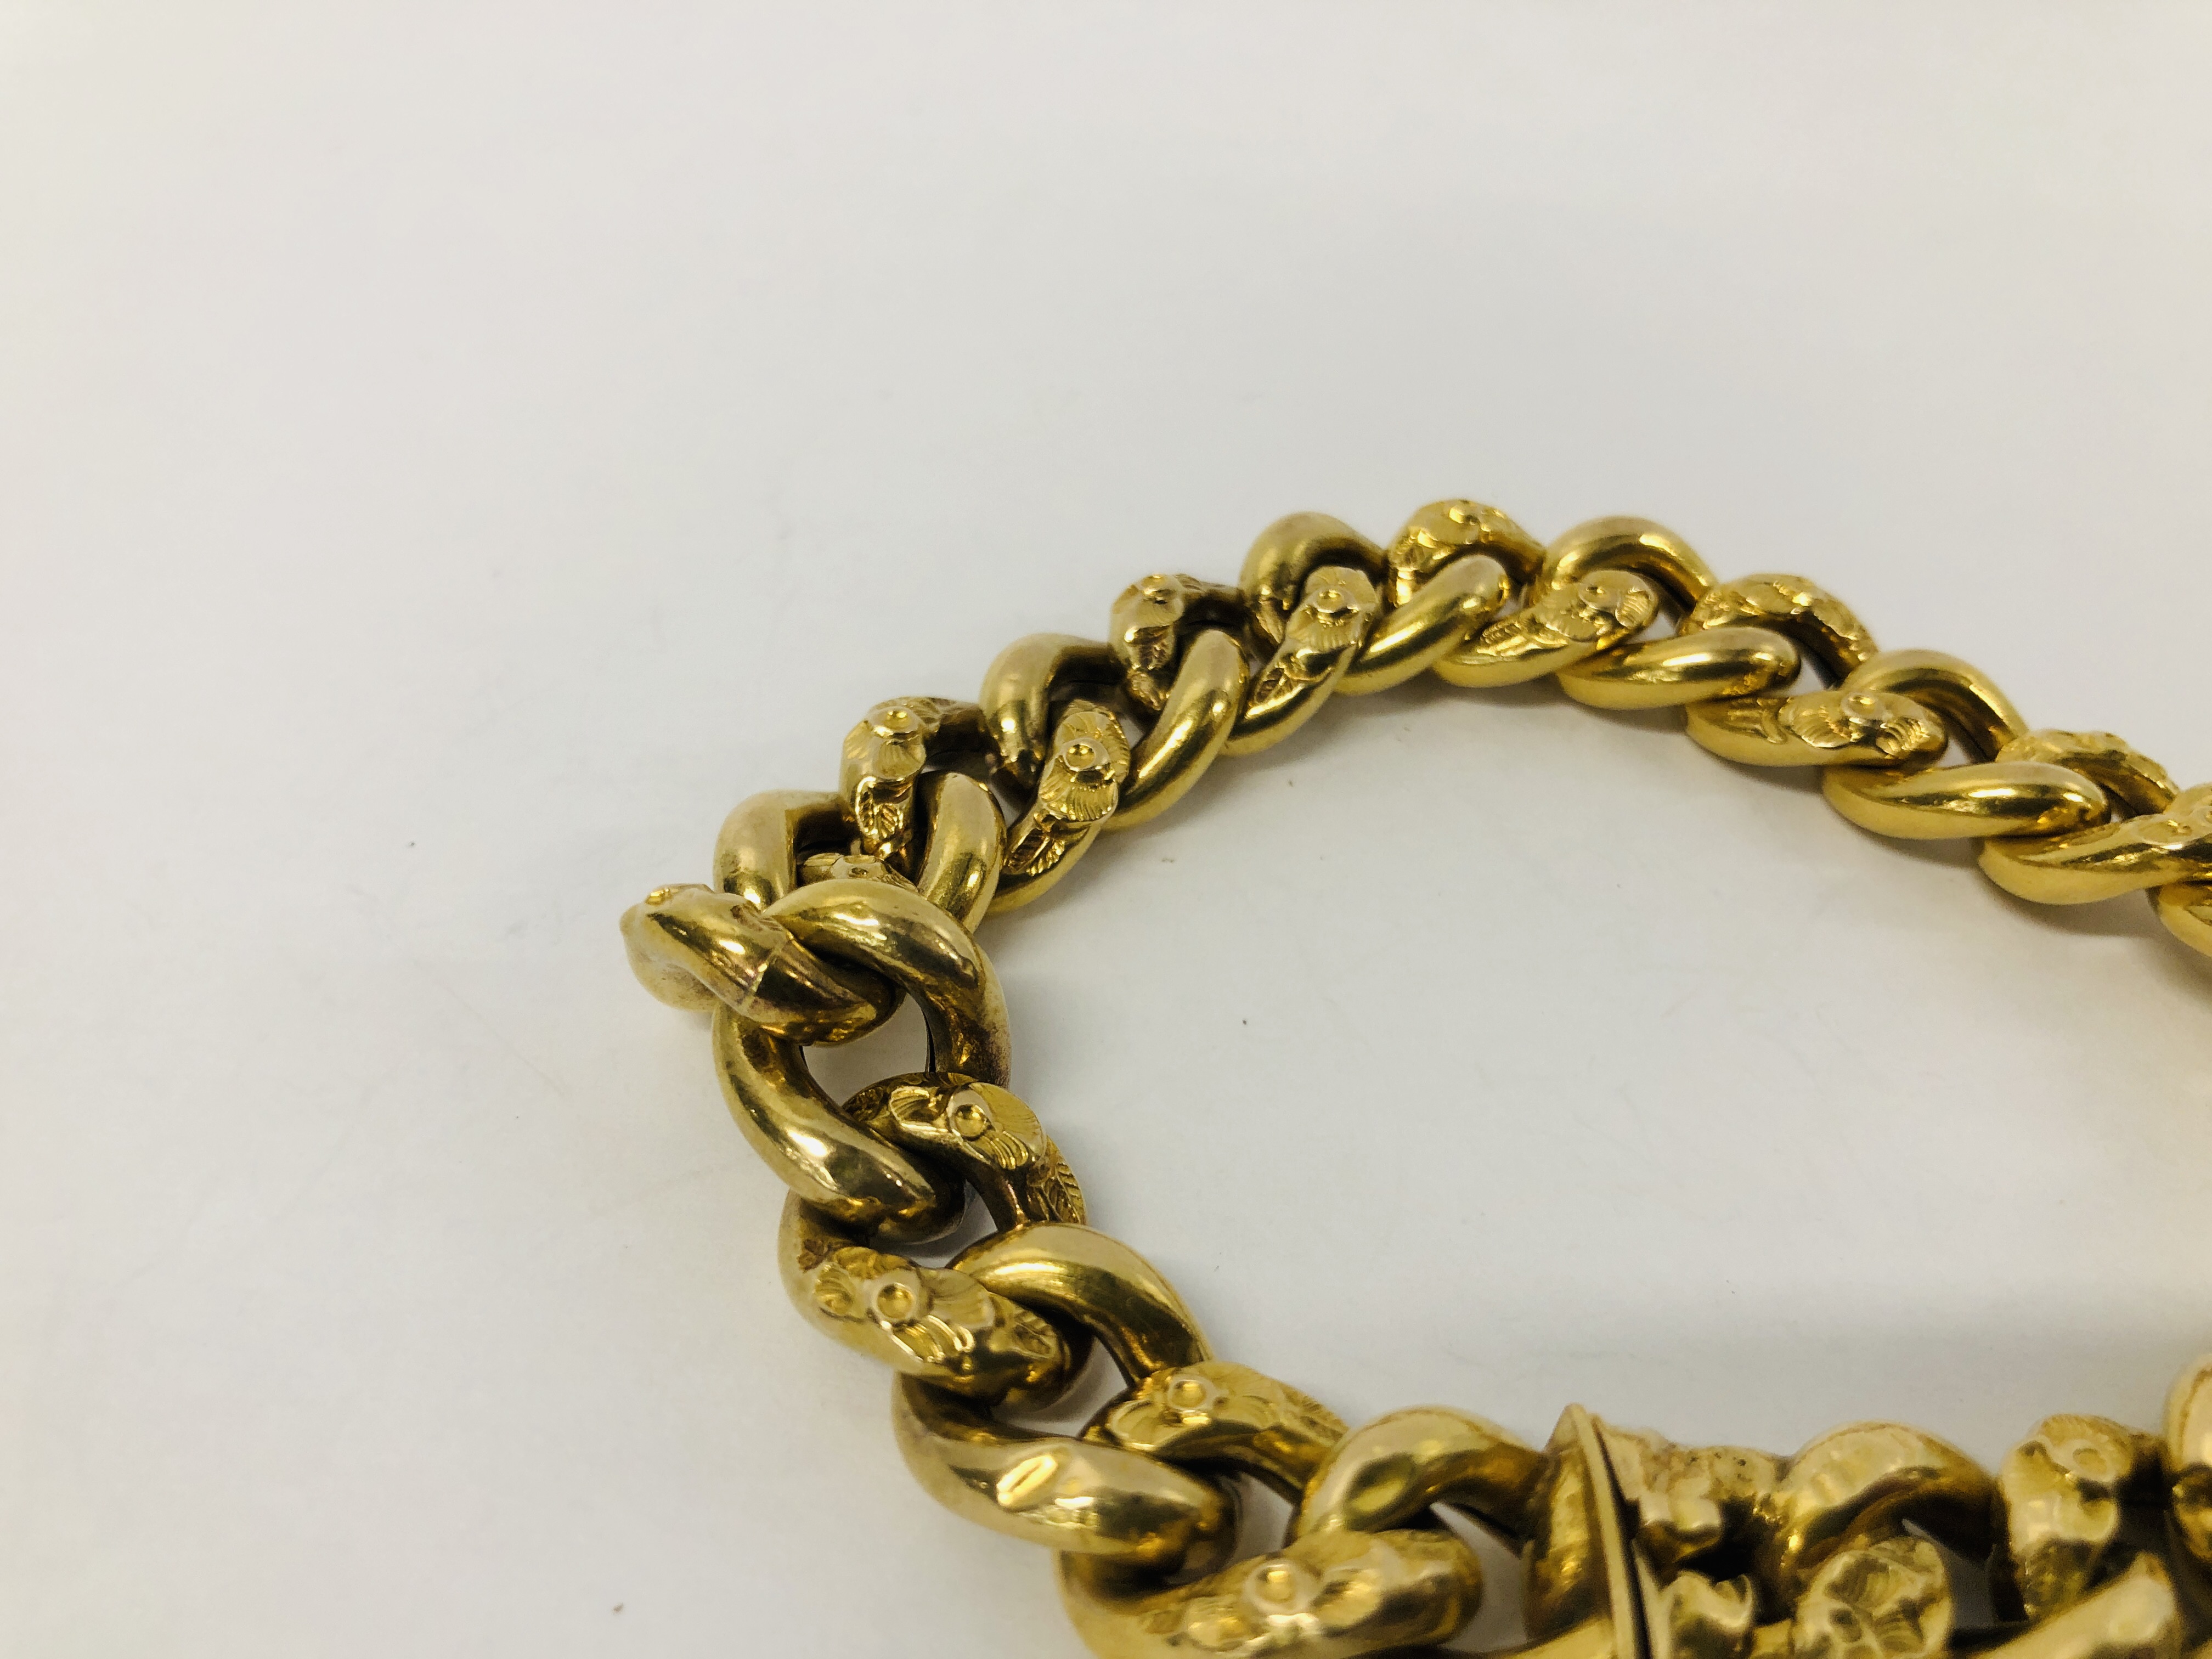 VINTAGE YELLOW METAL CURB BRACELET WITH SAFETY CHAIN (INDISTINCT MARKS). - Image 6 of 11